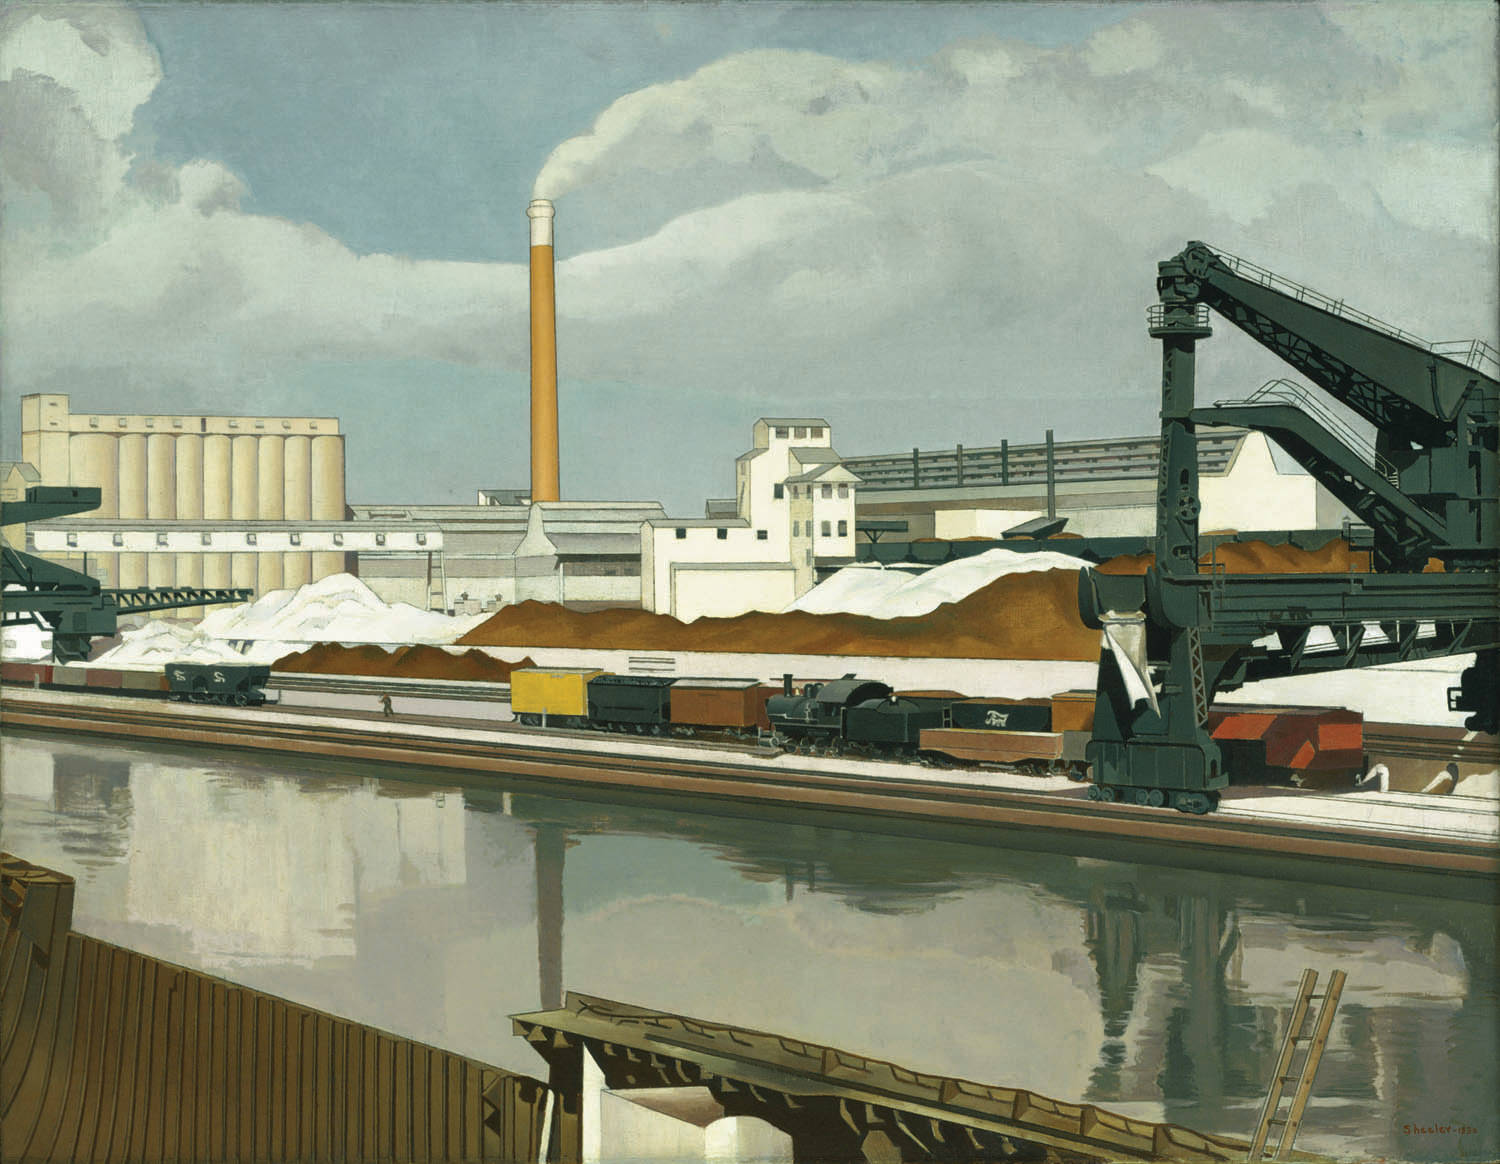 Charles Sheeler, American Landscape, 1930, as reproduced in Art in Time